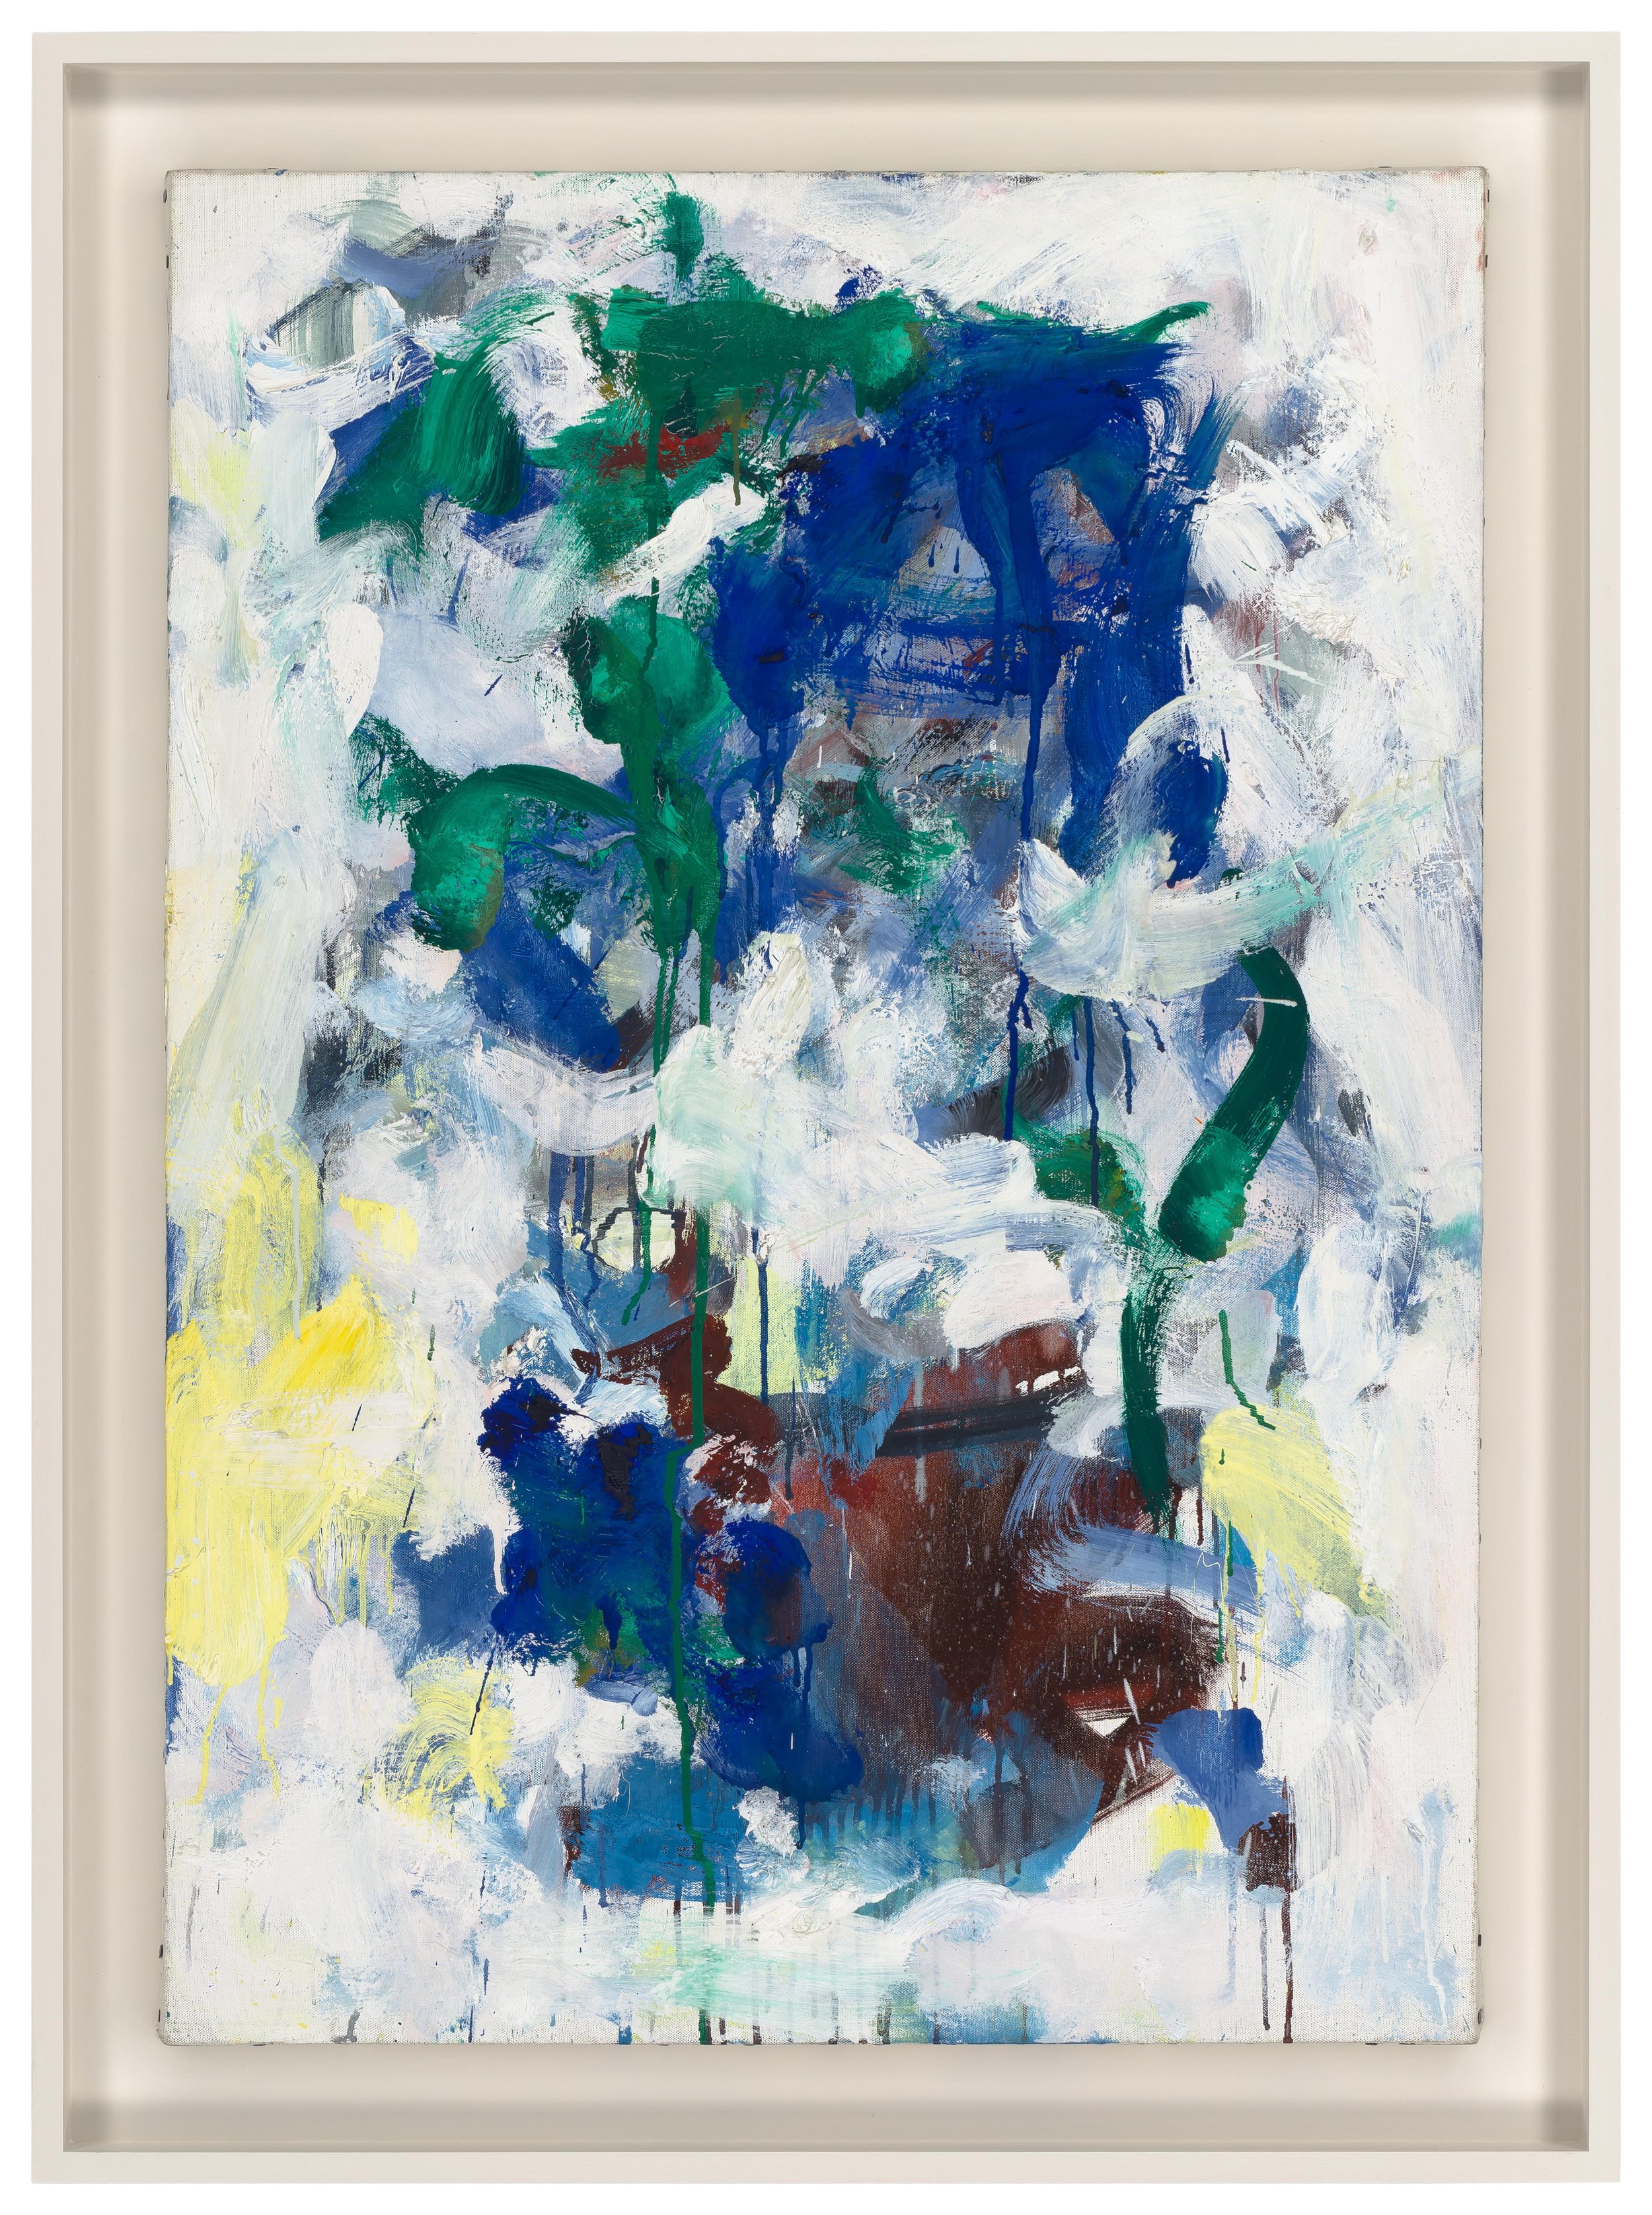  JOAN MITCHELL (1925-1992)     Untitled , c. 1987. Oil on canvas, 36.5  x  25.5 in.  